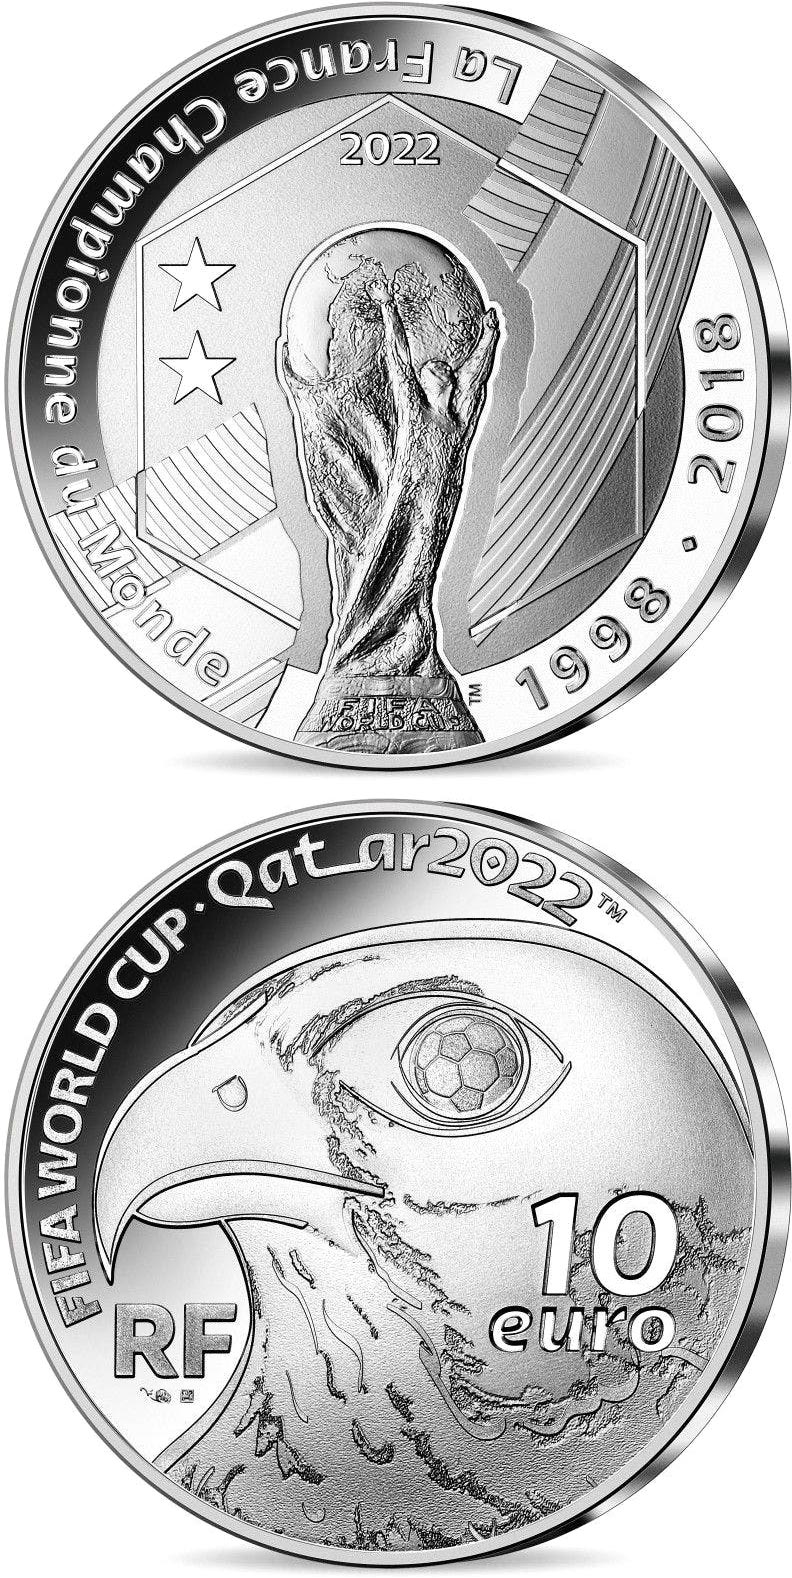 Image of 10 euro coin - FIFA Qatar - 2022 World Cup | France 2022.  The Silver coin is of Proof quality.